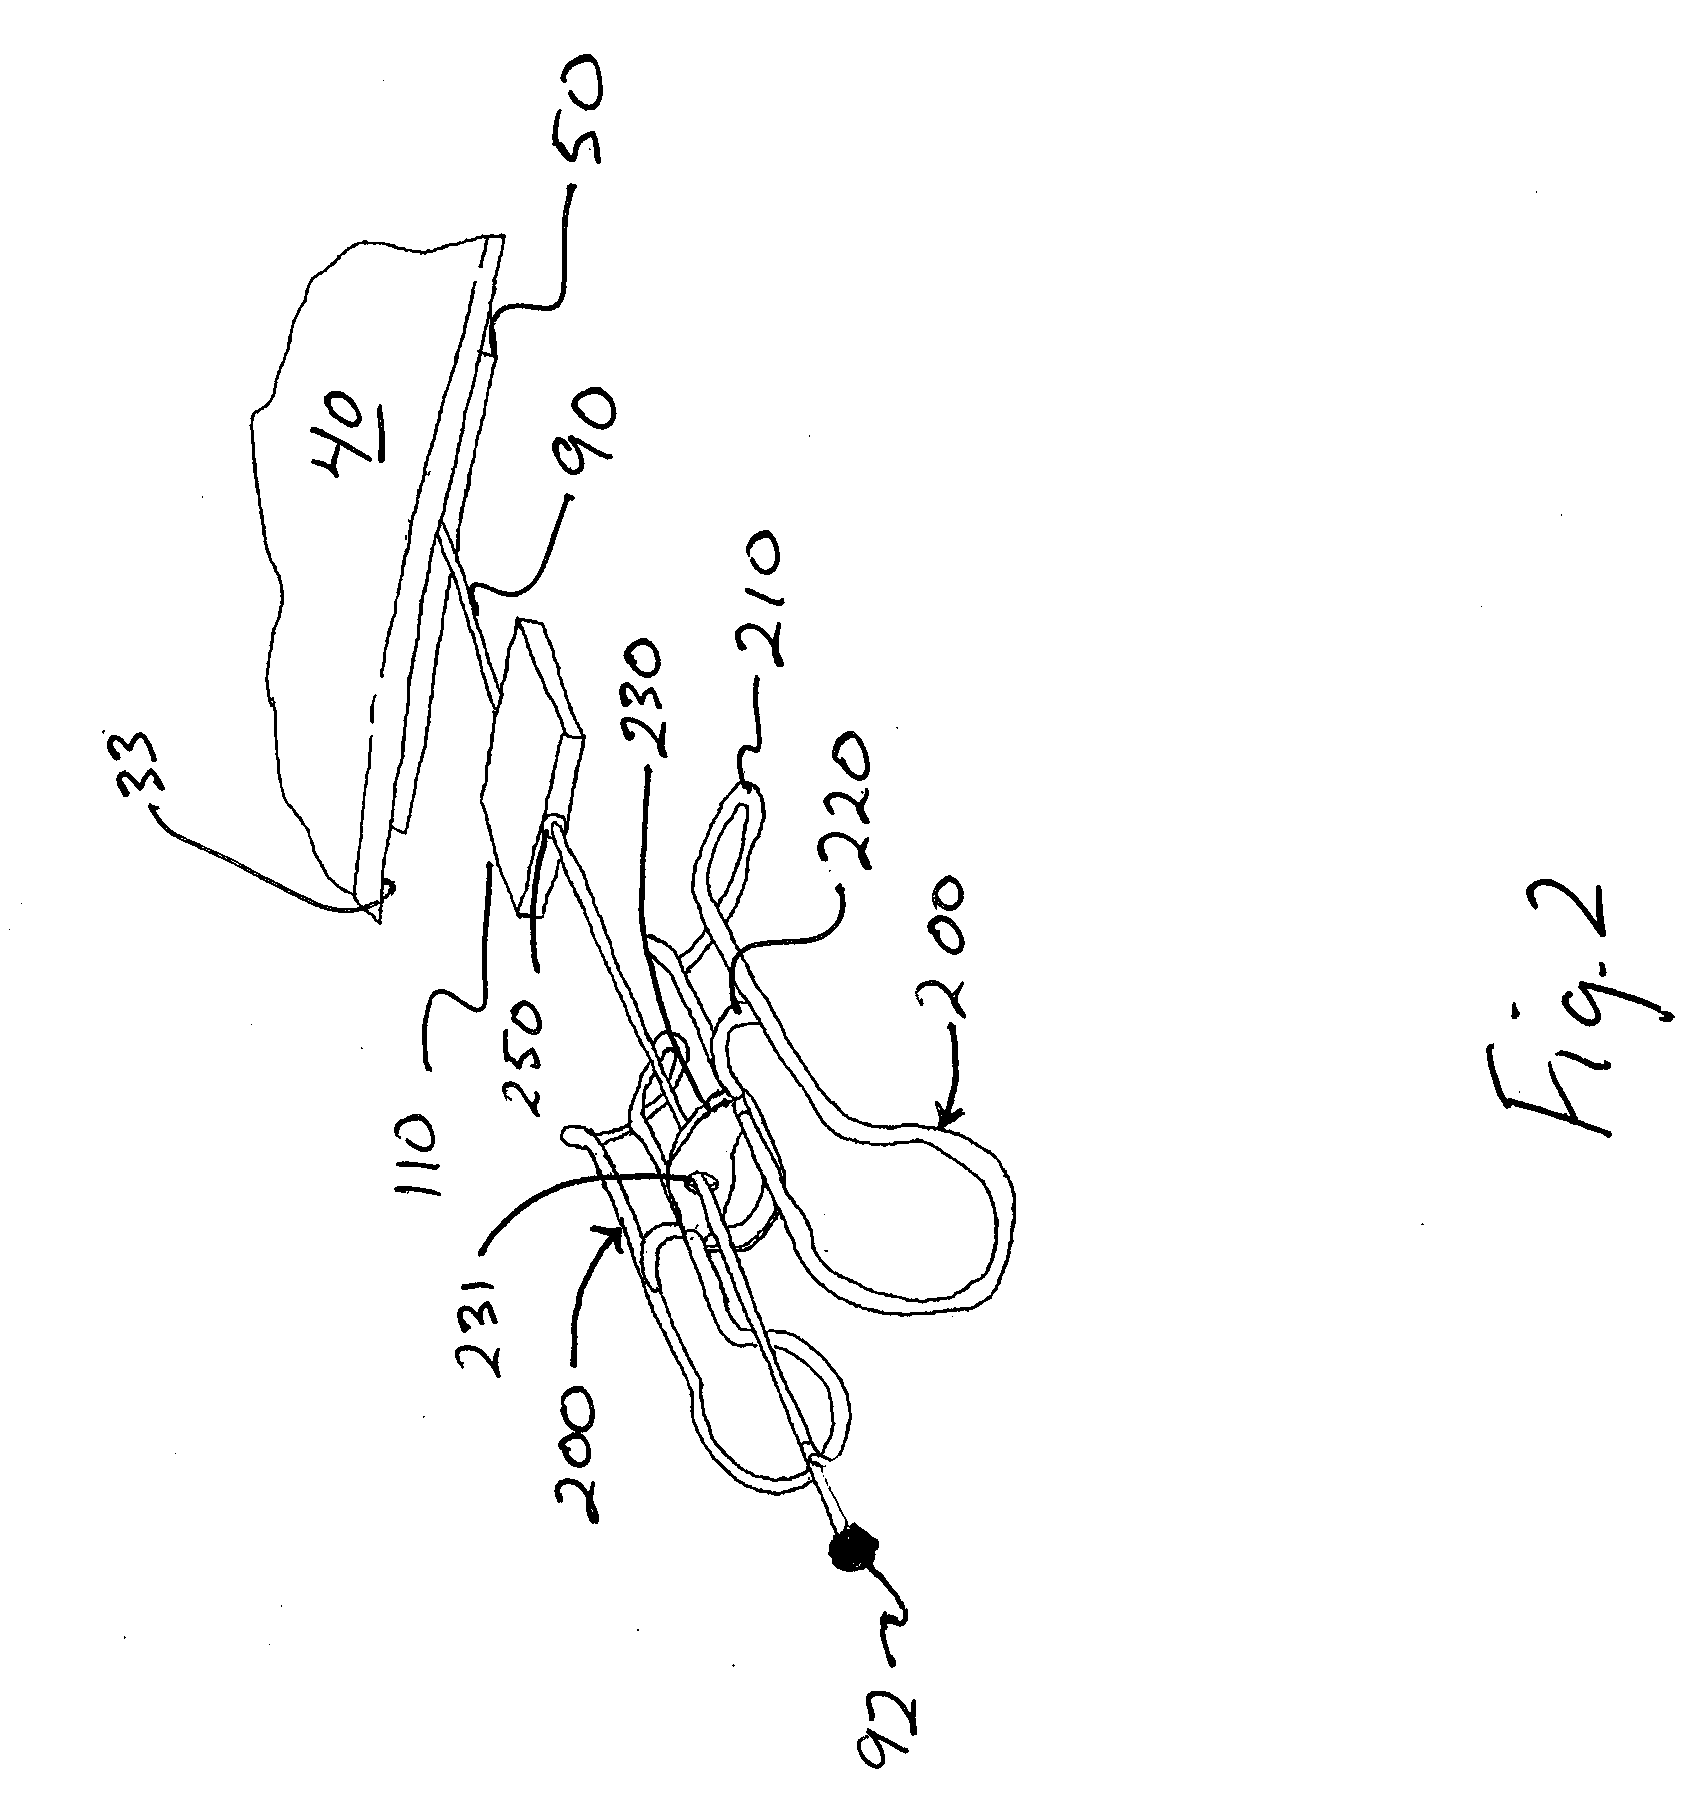 Functional low-profile dynamic extension splint and methods for its use and manufacture